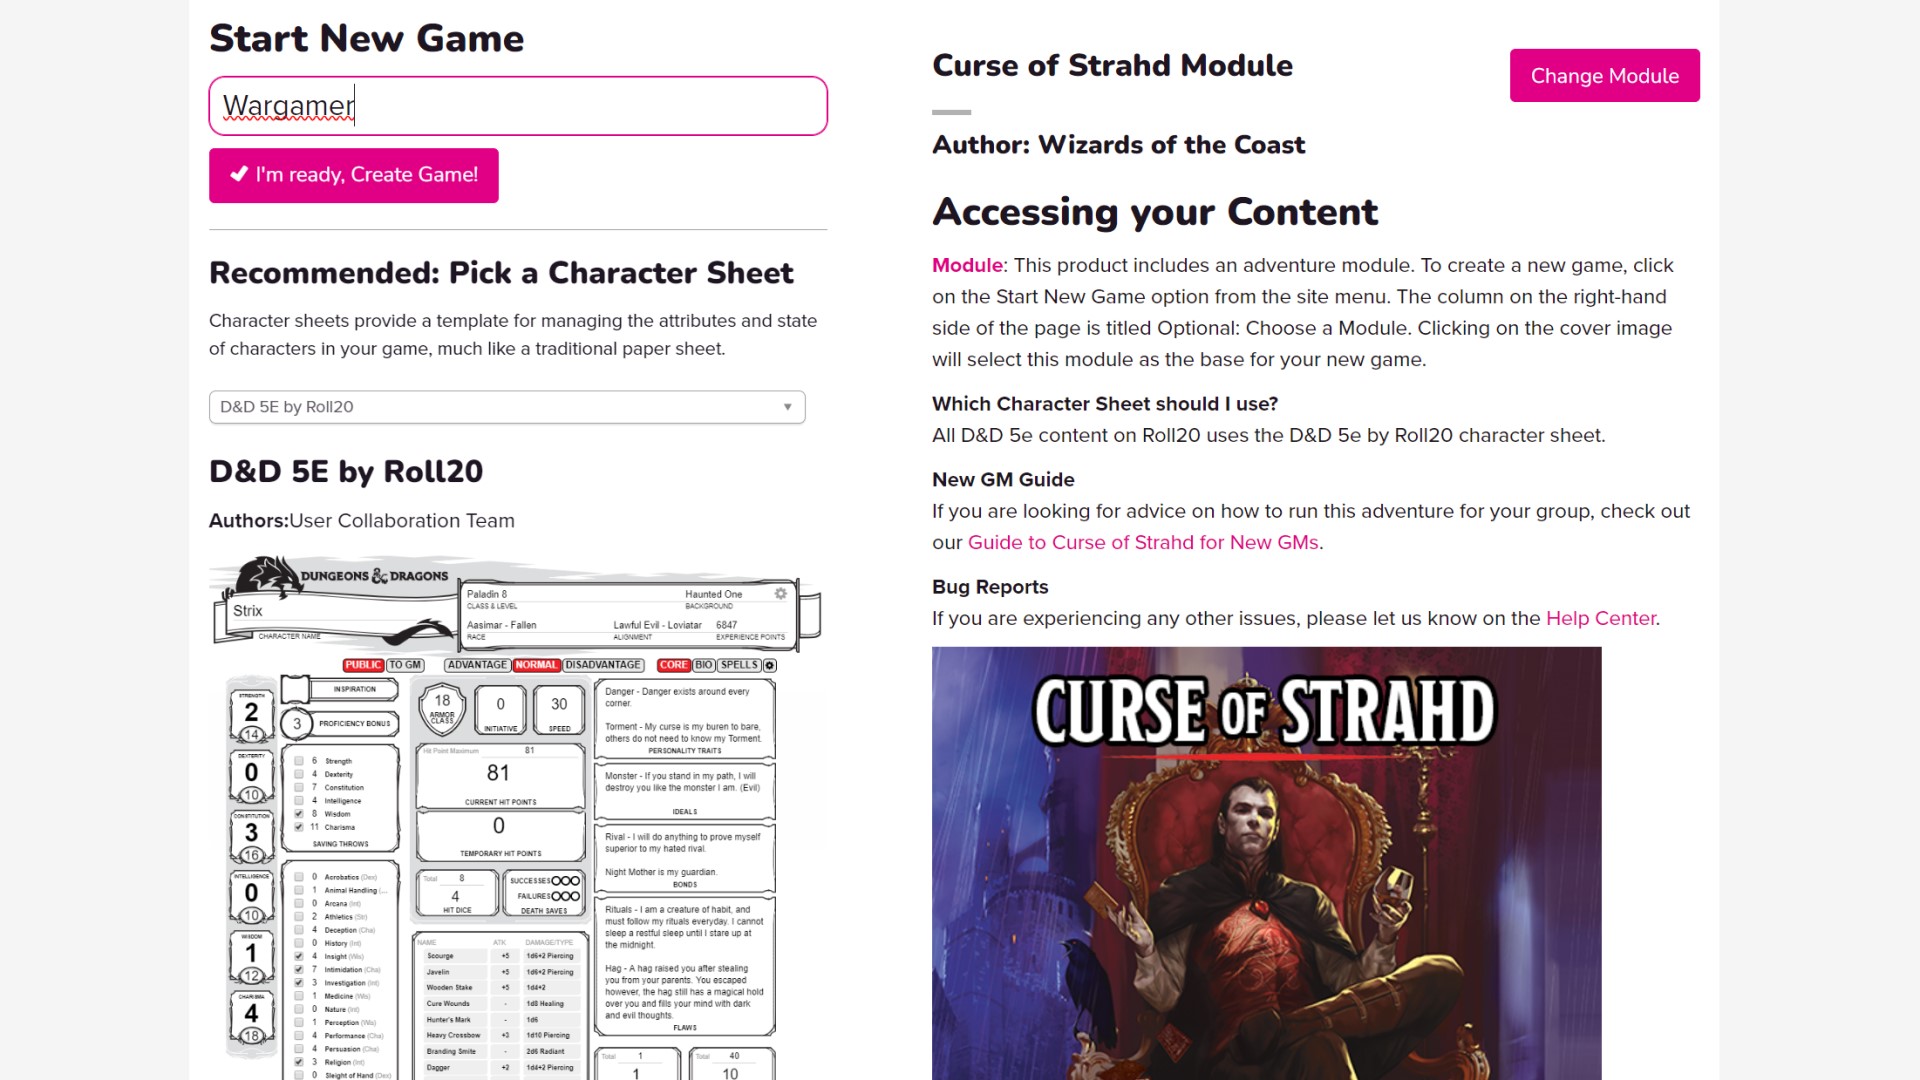 Complete Sewers and Dungeons  Roll20 Marketplace: Digital goods for online  tabletop gaming